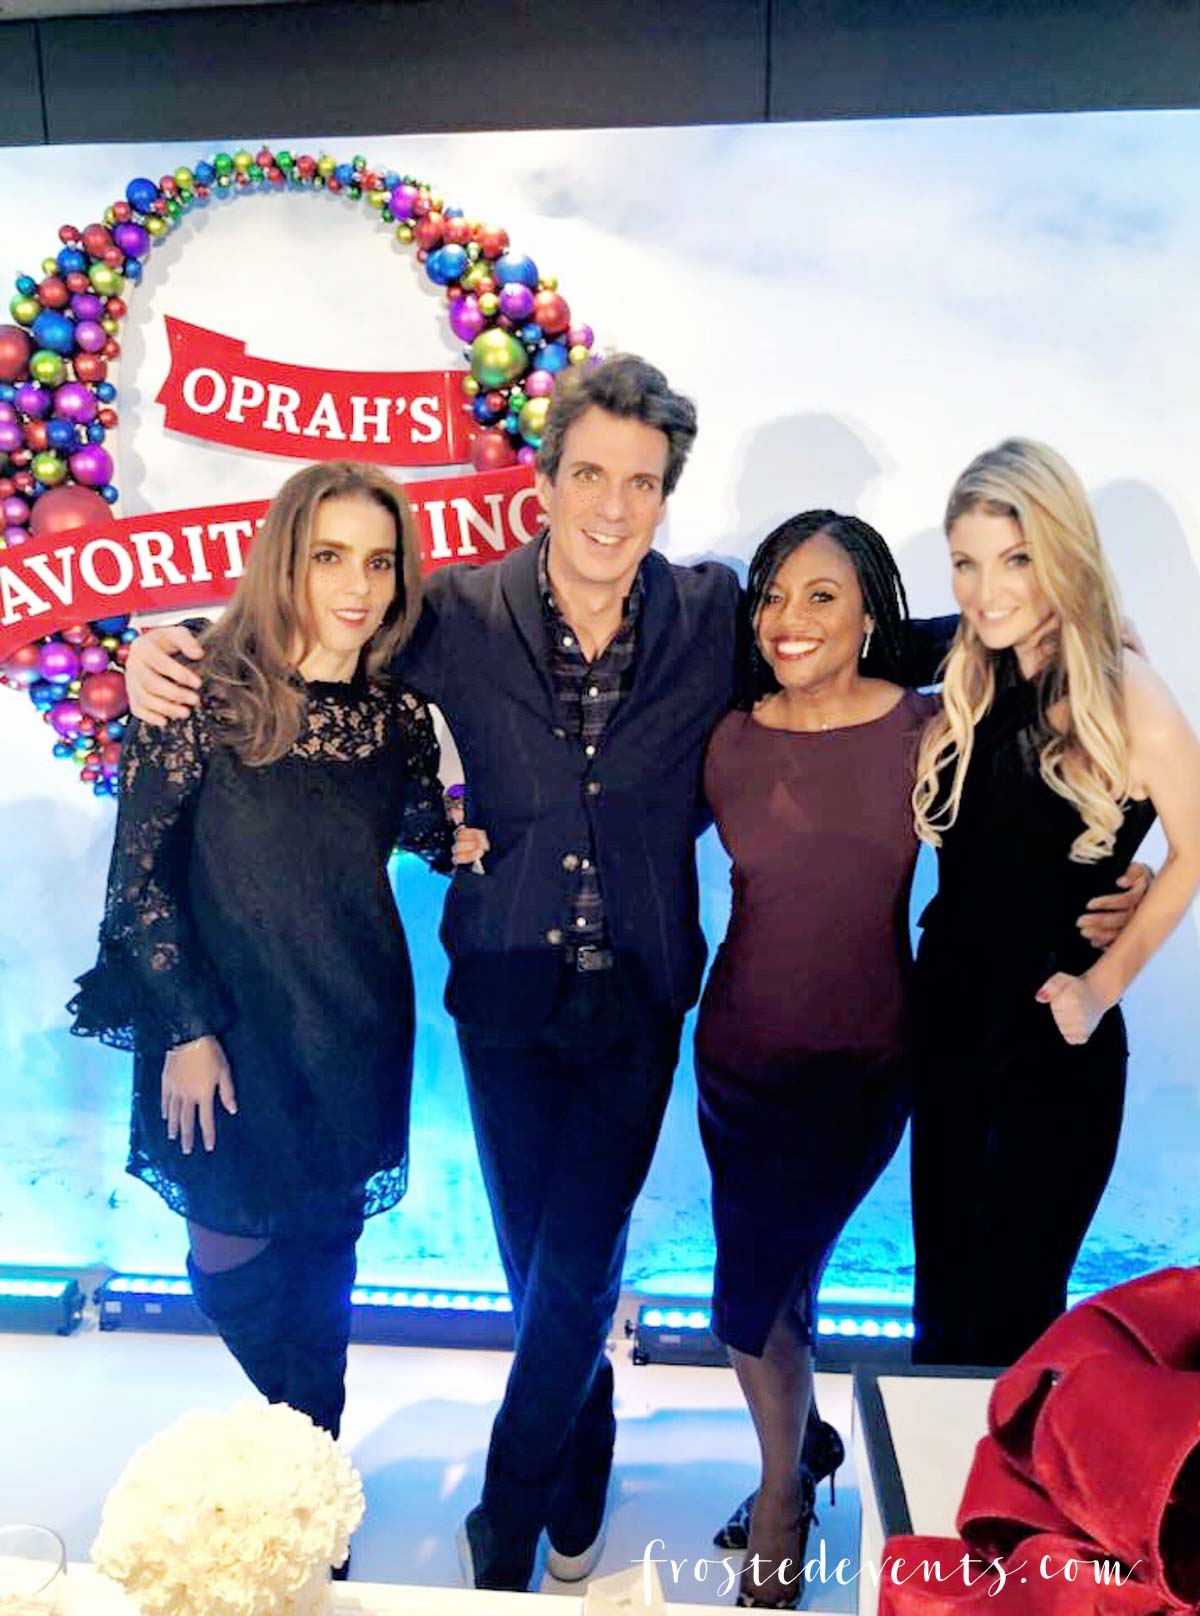 Oprah's Favorite Things 2017 party was last Thursday and I had the unbelievable opportunity to attend and reveal a very exciting secret I've been dying to share. Here's a look at what it's like to be a guest at the best holiday party ever!....  As an OMagazine Insider I get invited to participate in some pretty cool experiences. But never in my wildest dreams did I imagine that I would be invited to Oprah's Favorite Things party! Ya'll, I'm still completely in shock and covered in bruises from pinching myself about a million times. Oh, how I wish you could have seen the happy dance that I did when I opened the email invitation. It would be a viral video for sure. Something comparable to lottery ticket winners or Justin Beiber fans who find out they're going to get to meet the Biebs backstage. There was screaming, lots of screaming... and even tears of joy. Maybe wails of joy, sobs. Ok, I was a sobbing, wailing, ecstatic hot mess. It was truly that exciting! Here we are in the elevator on our way up to the party. I adore my  OMag Insiders tribe! It's such a wonderful group of inspiring ladies from all walks of life. They are creative, brilliant, funny, strong and successful as hell. But what really makes them special is the love and support they so generously share with each other. I'm so blessed to be a part of this family! My heart was racing as we made our way into the room. You could feel the buzz of excitement walking in, a mix of media and marketers, executives and a few celebrities too! Our fabulous elf Cara guided us to our table by the stage before giving us a mini tour of the party. A cocktail bar featuring Oprah's favorite tequila, Casa Dragones was serving up drinks at the back. Guests were taking pics with the life-size replica of the December O Magazine photo stand-in. I grabbed a cocktail, some nibbles from the delicious food spread and a cupcake (or two!) and mingled a bit before the show began. Gayle King and Adam Glassman were our hosts for the evening, taking the stage to reveal the list of holiday gifts Oprah hand selected for this years list. They uncovered the first box and explained why Oprah chose this gift and how she goes about choosing all the gifts. And then Adam said the magic words.... 